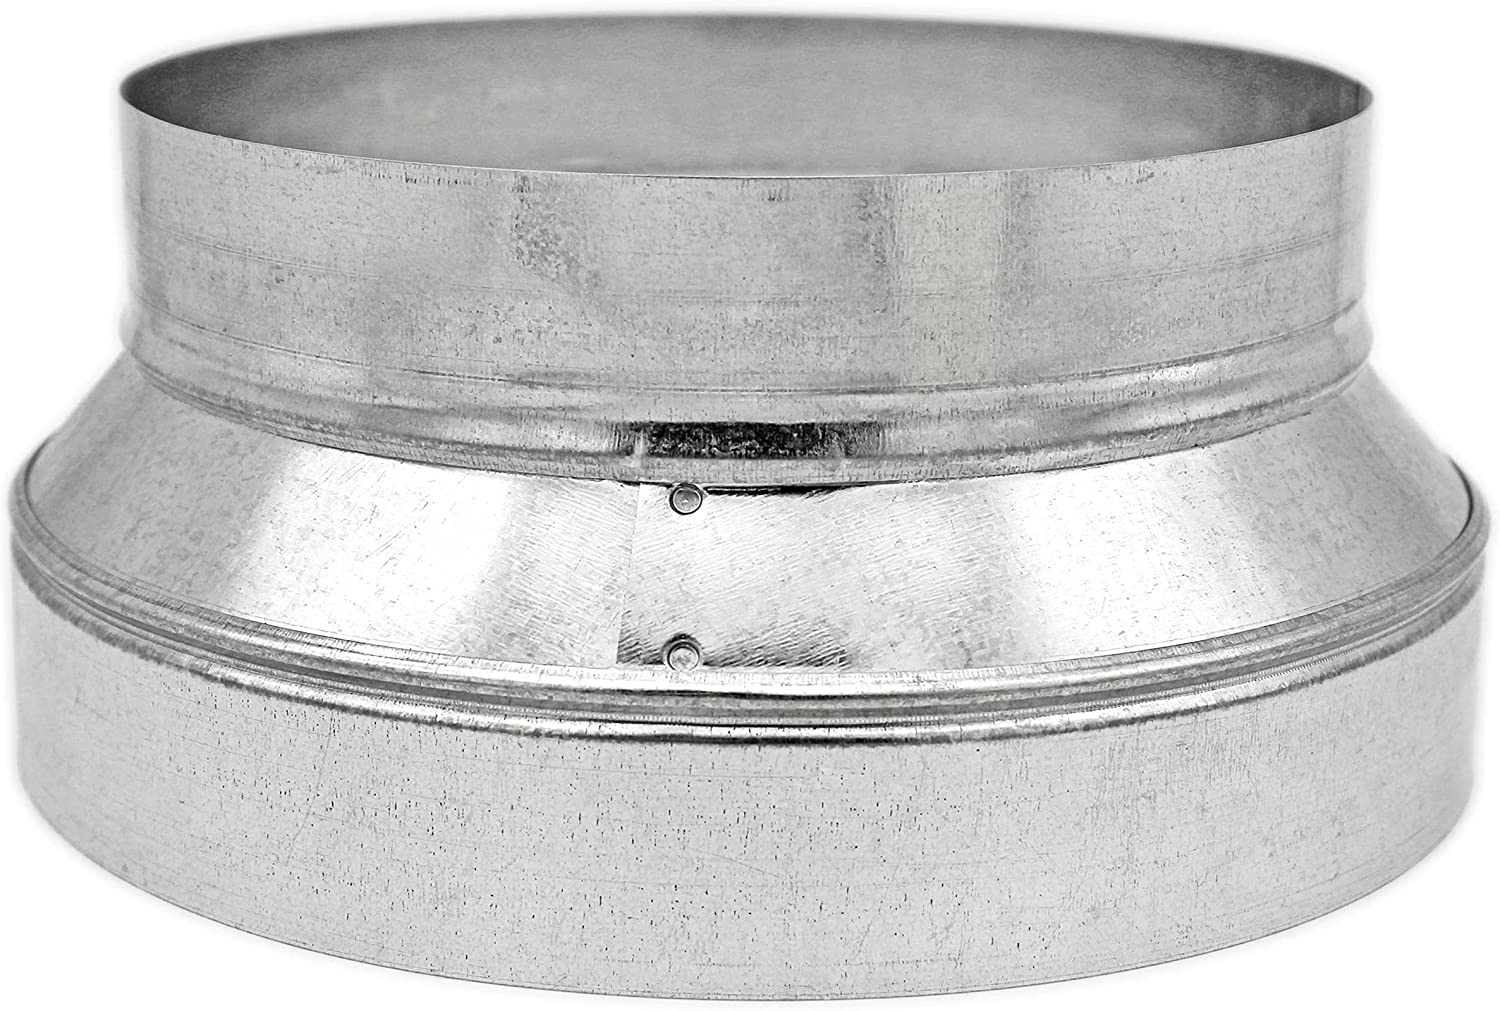 HVAC Premium Round Metal Pipe Reducer & Increaser | 9" to 8" HVAC Duct Reducer or Increaser 30g Gauge | Galvanized Sheet Metal Ducting Connector is Compatible with Duct 8"